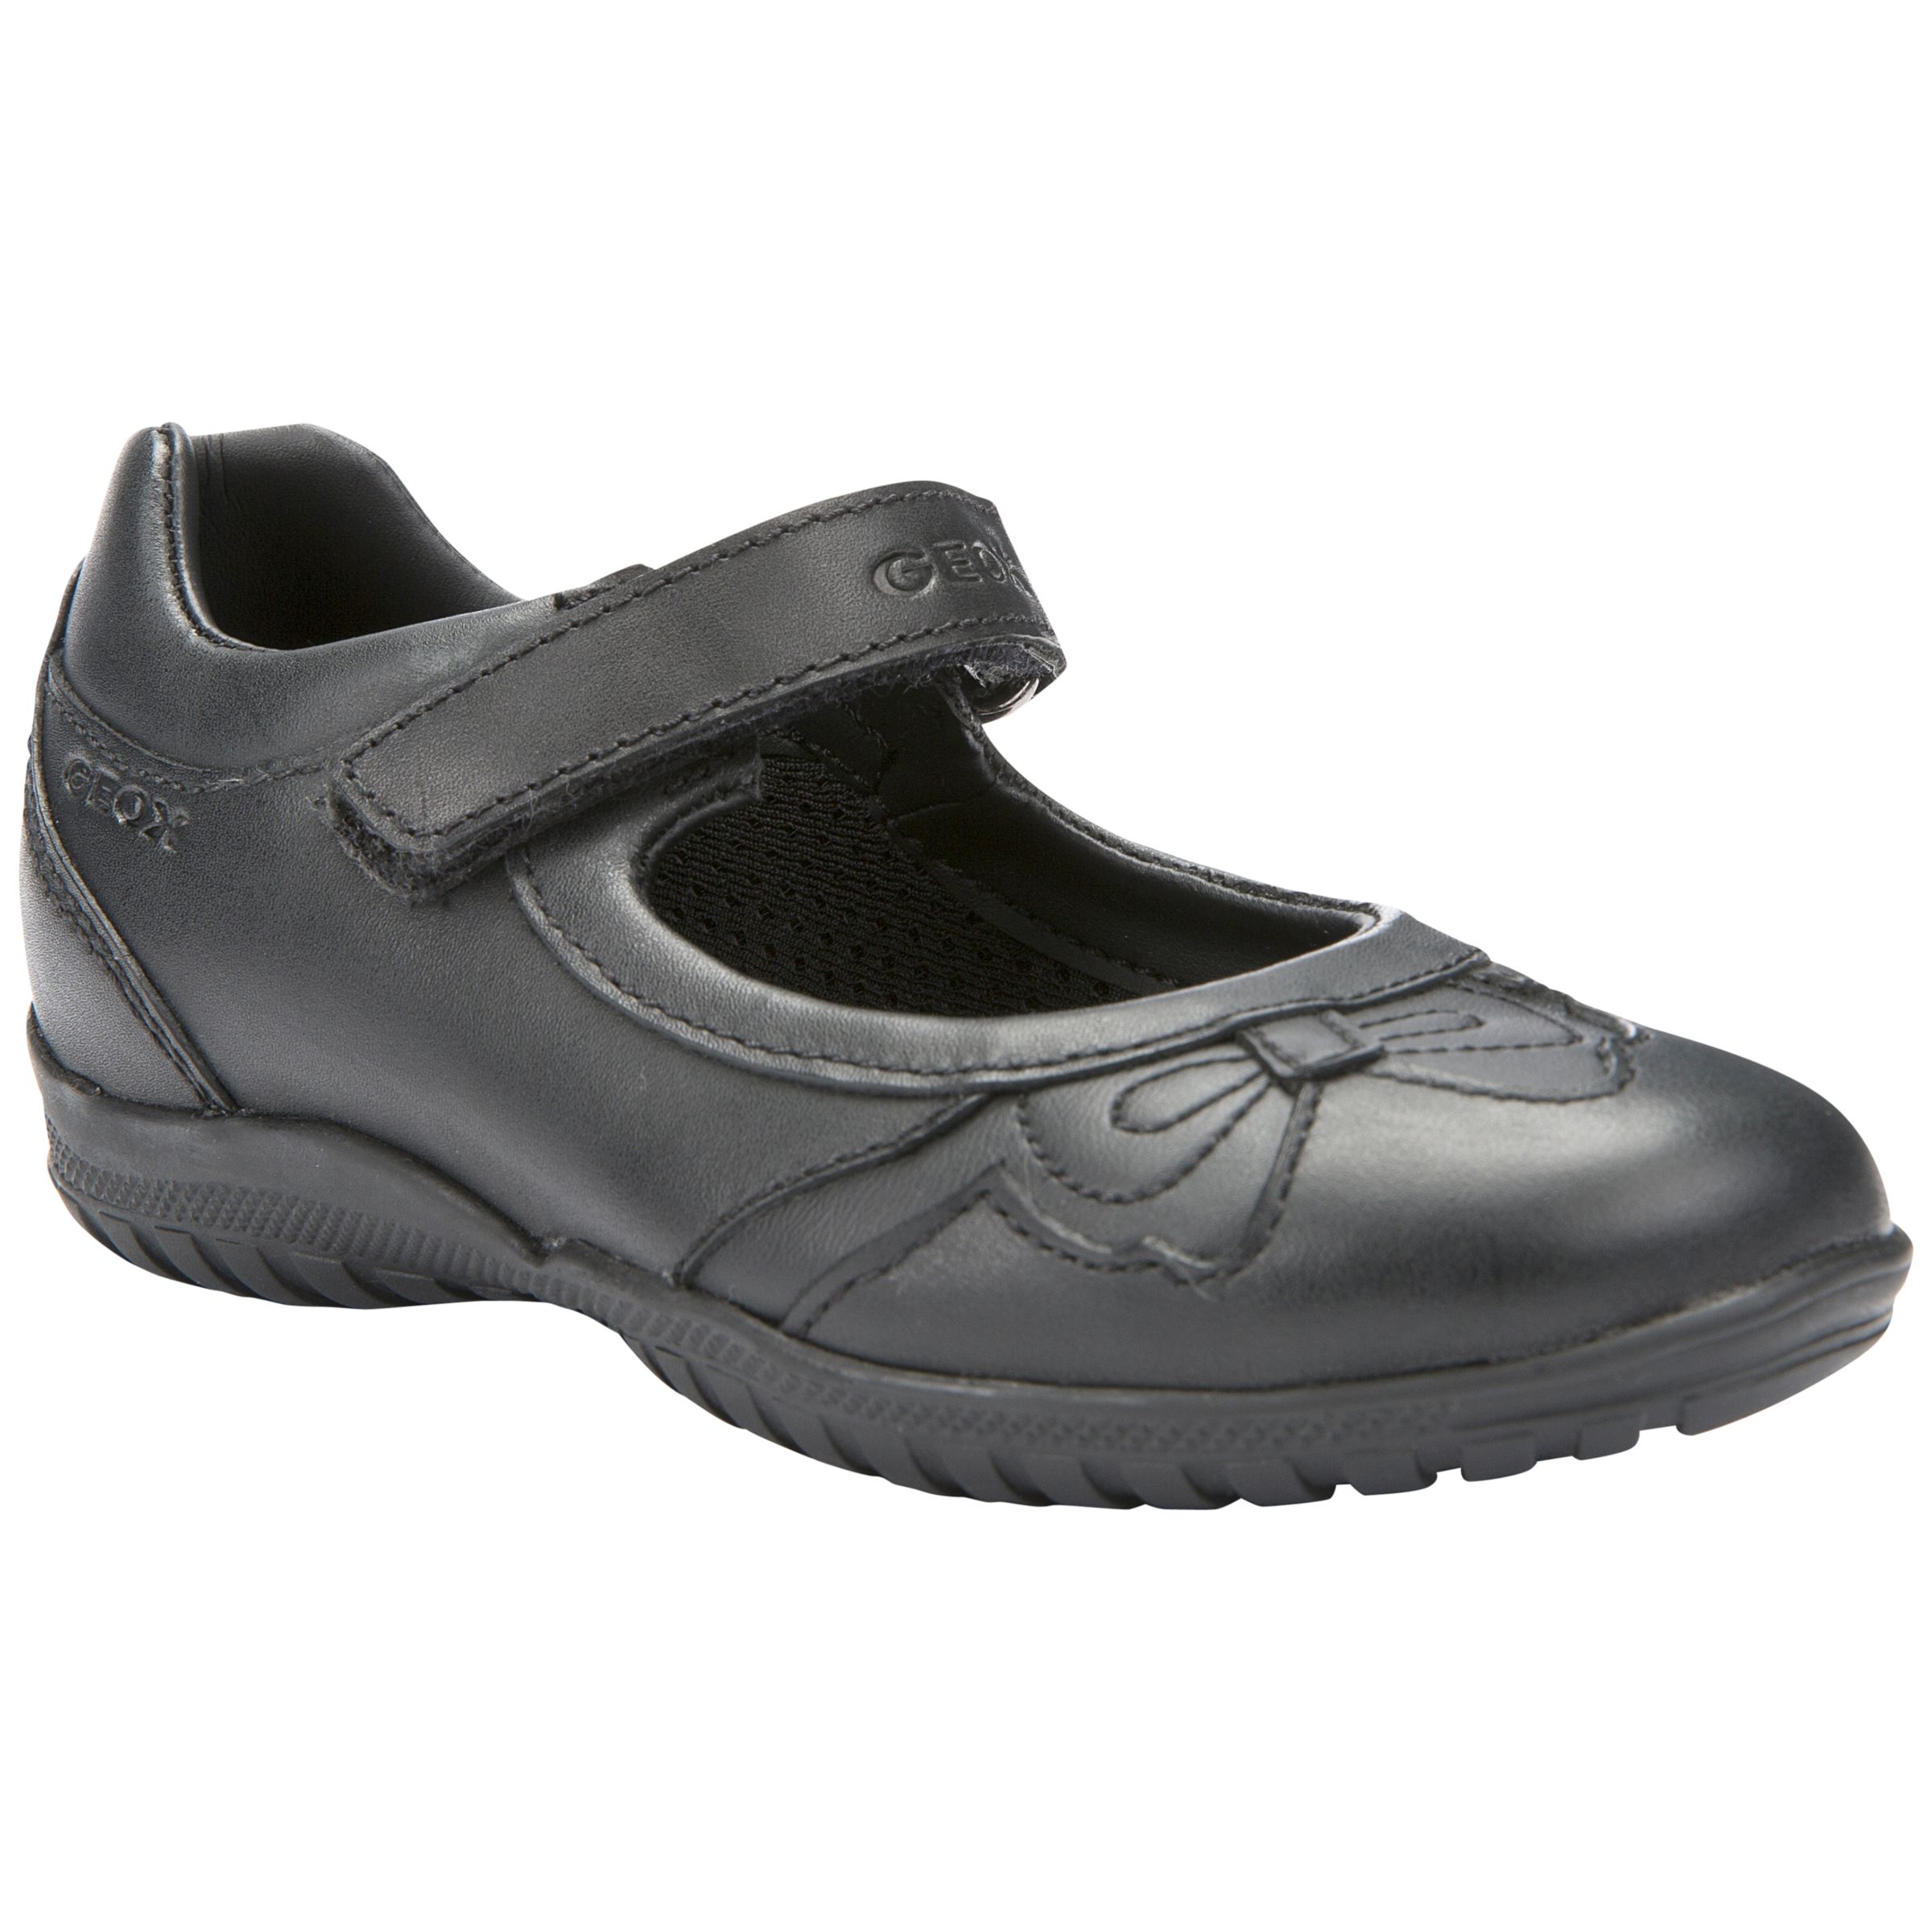 Geox Shadow Bow Shoes, Black